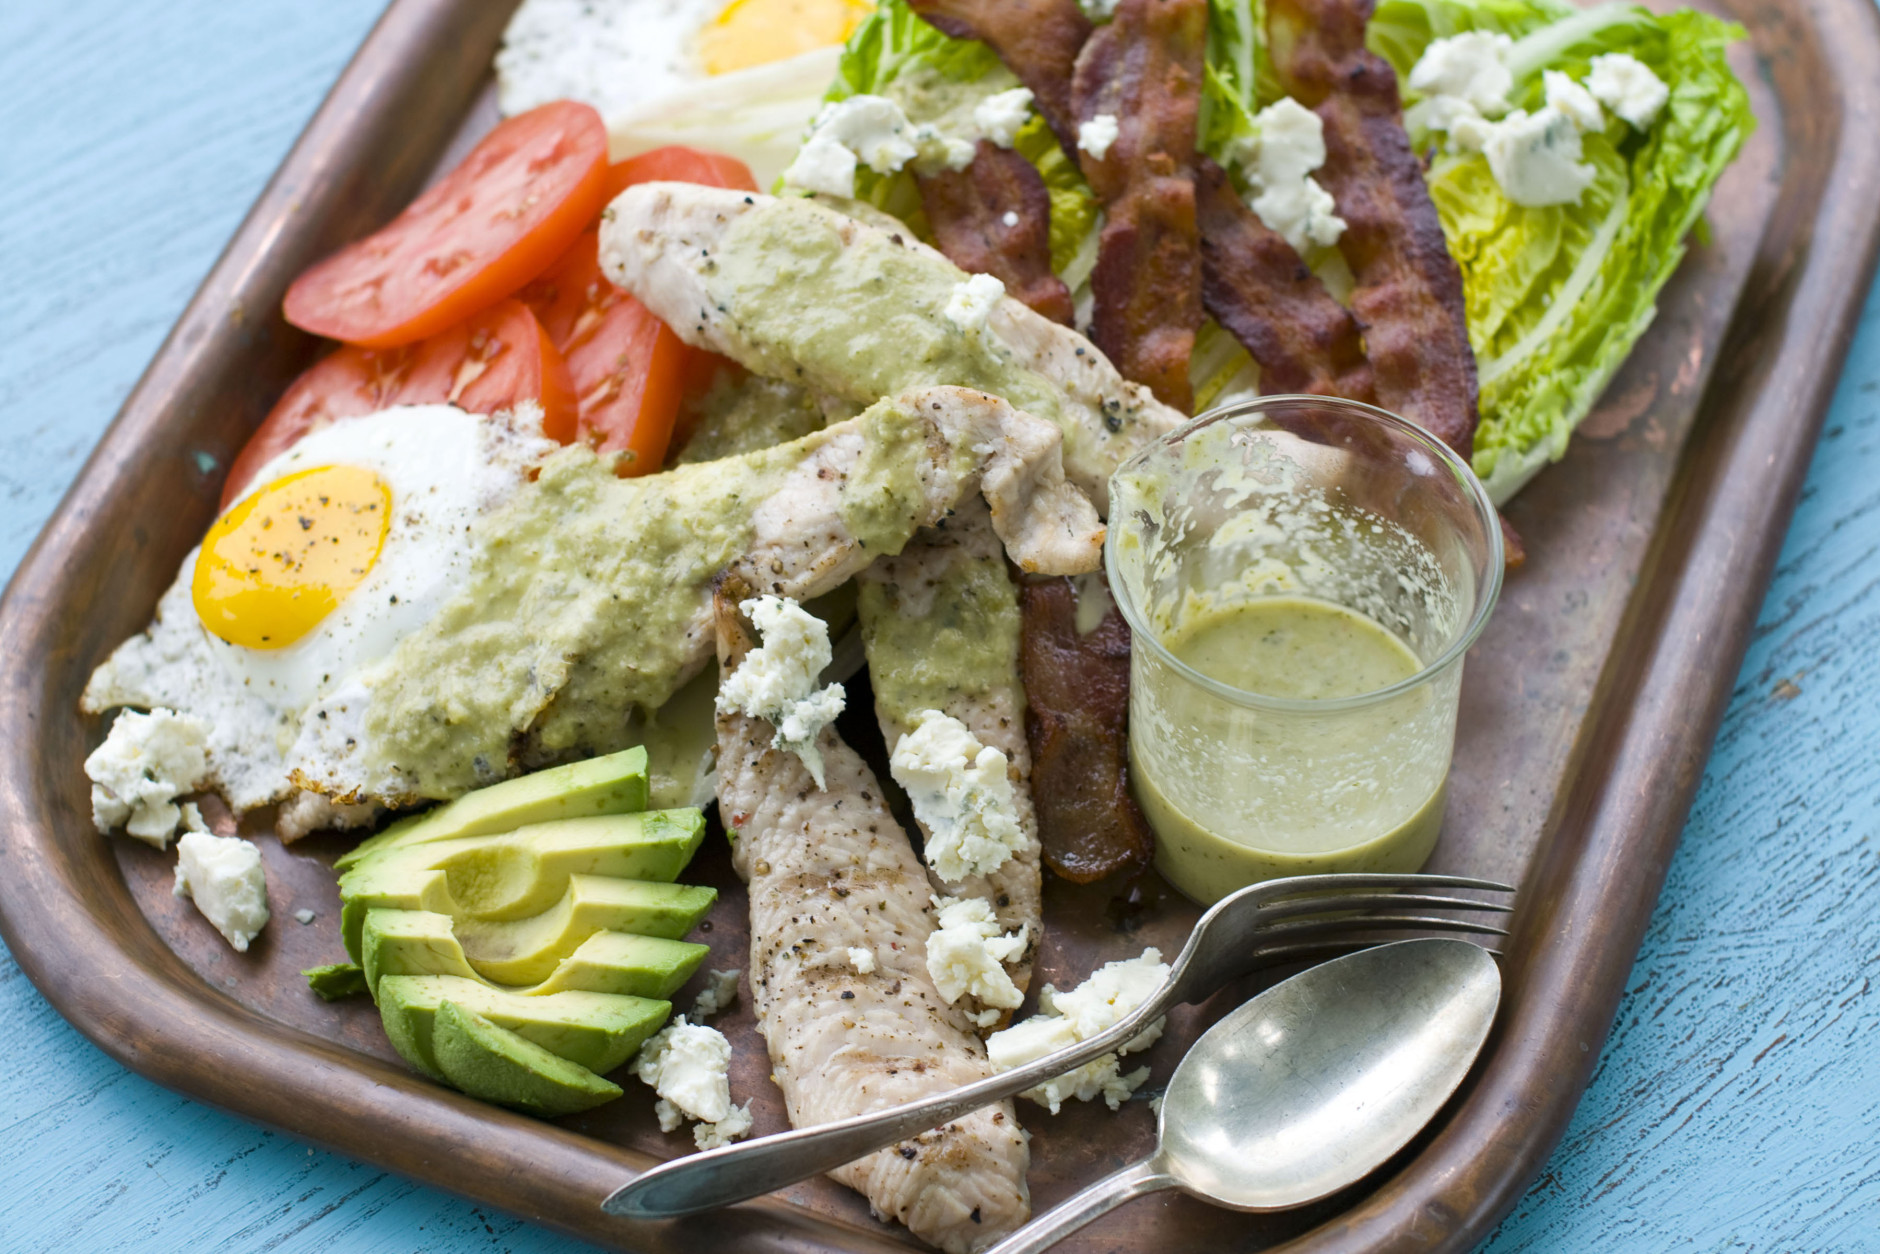 This image taken on May 30, 2012 in Concord, N.H. shows a grilled Cobb salad made with chicken, egg, avocado, tomato, bacon, blue cheese, and greens displayed on a platter. (AP Photo/Matthew Mead)